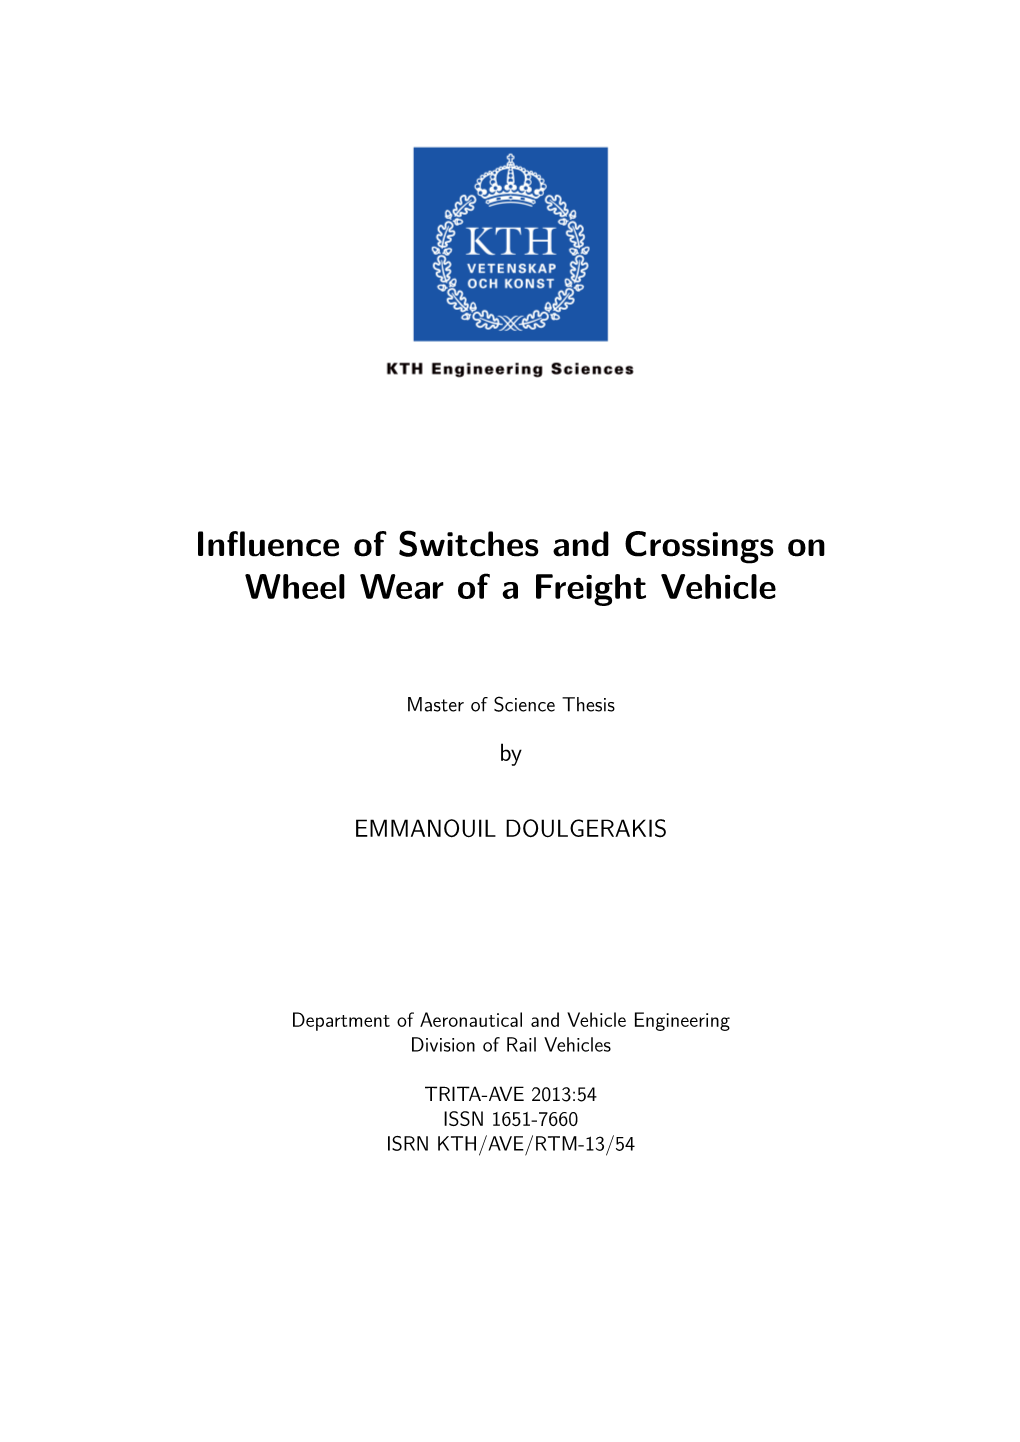 Influence of Switches and Crossings on Wheel Wear of a Freight Vehicle